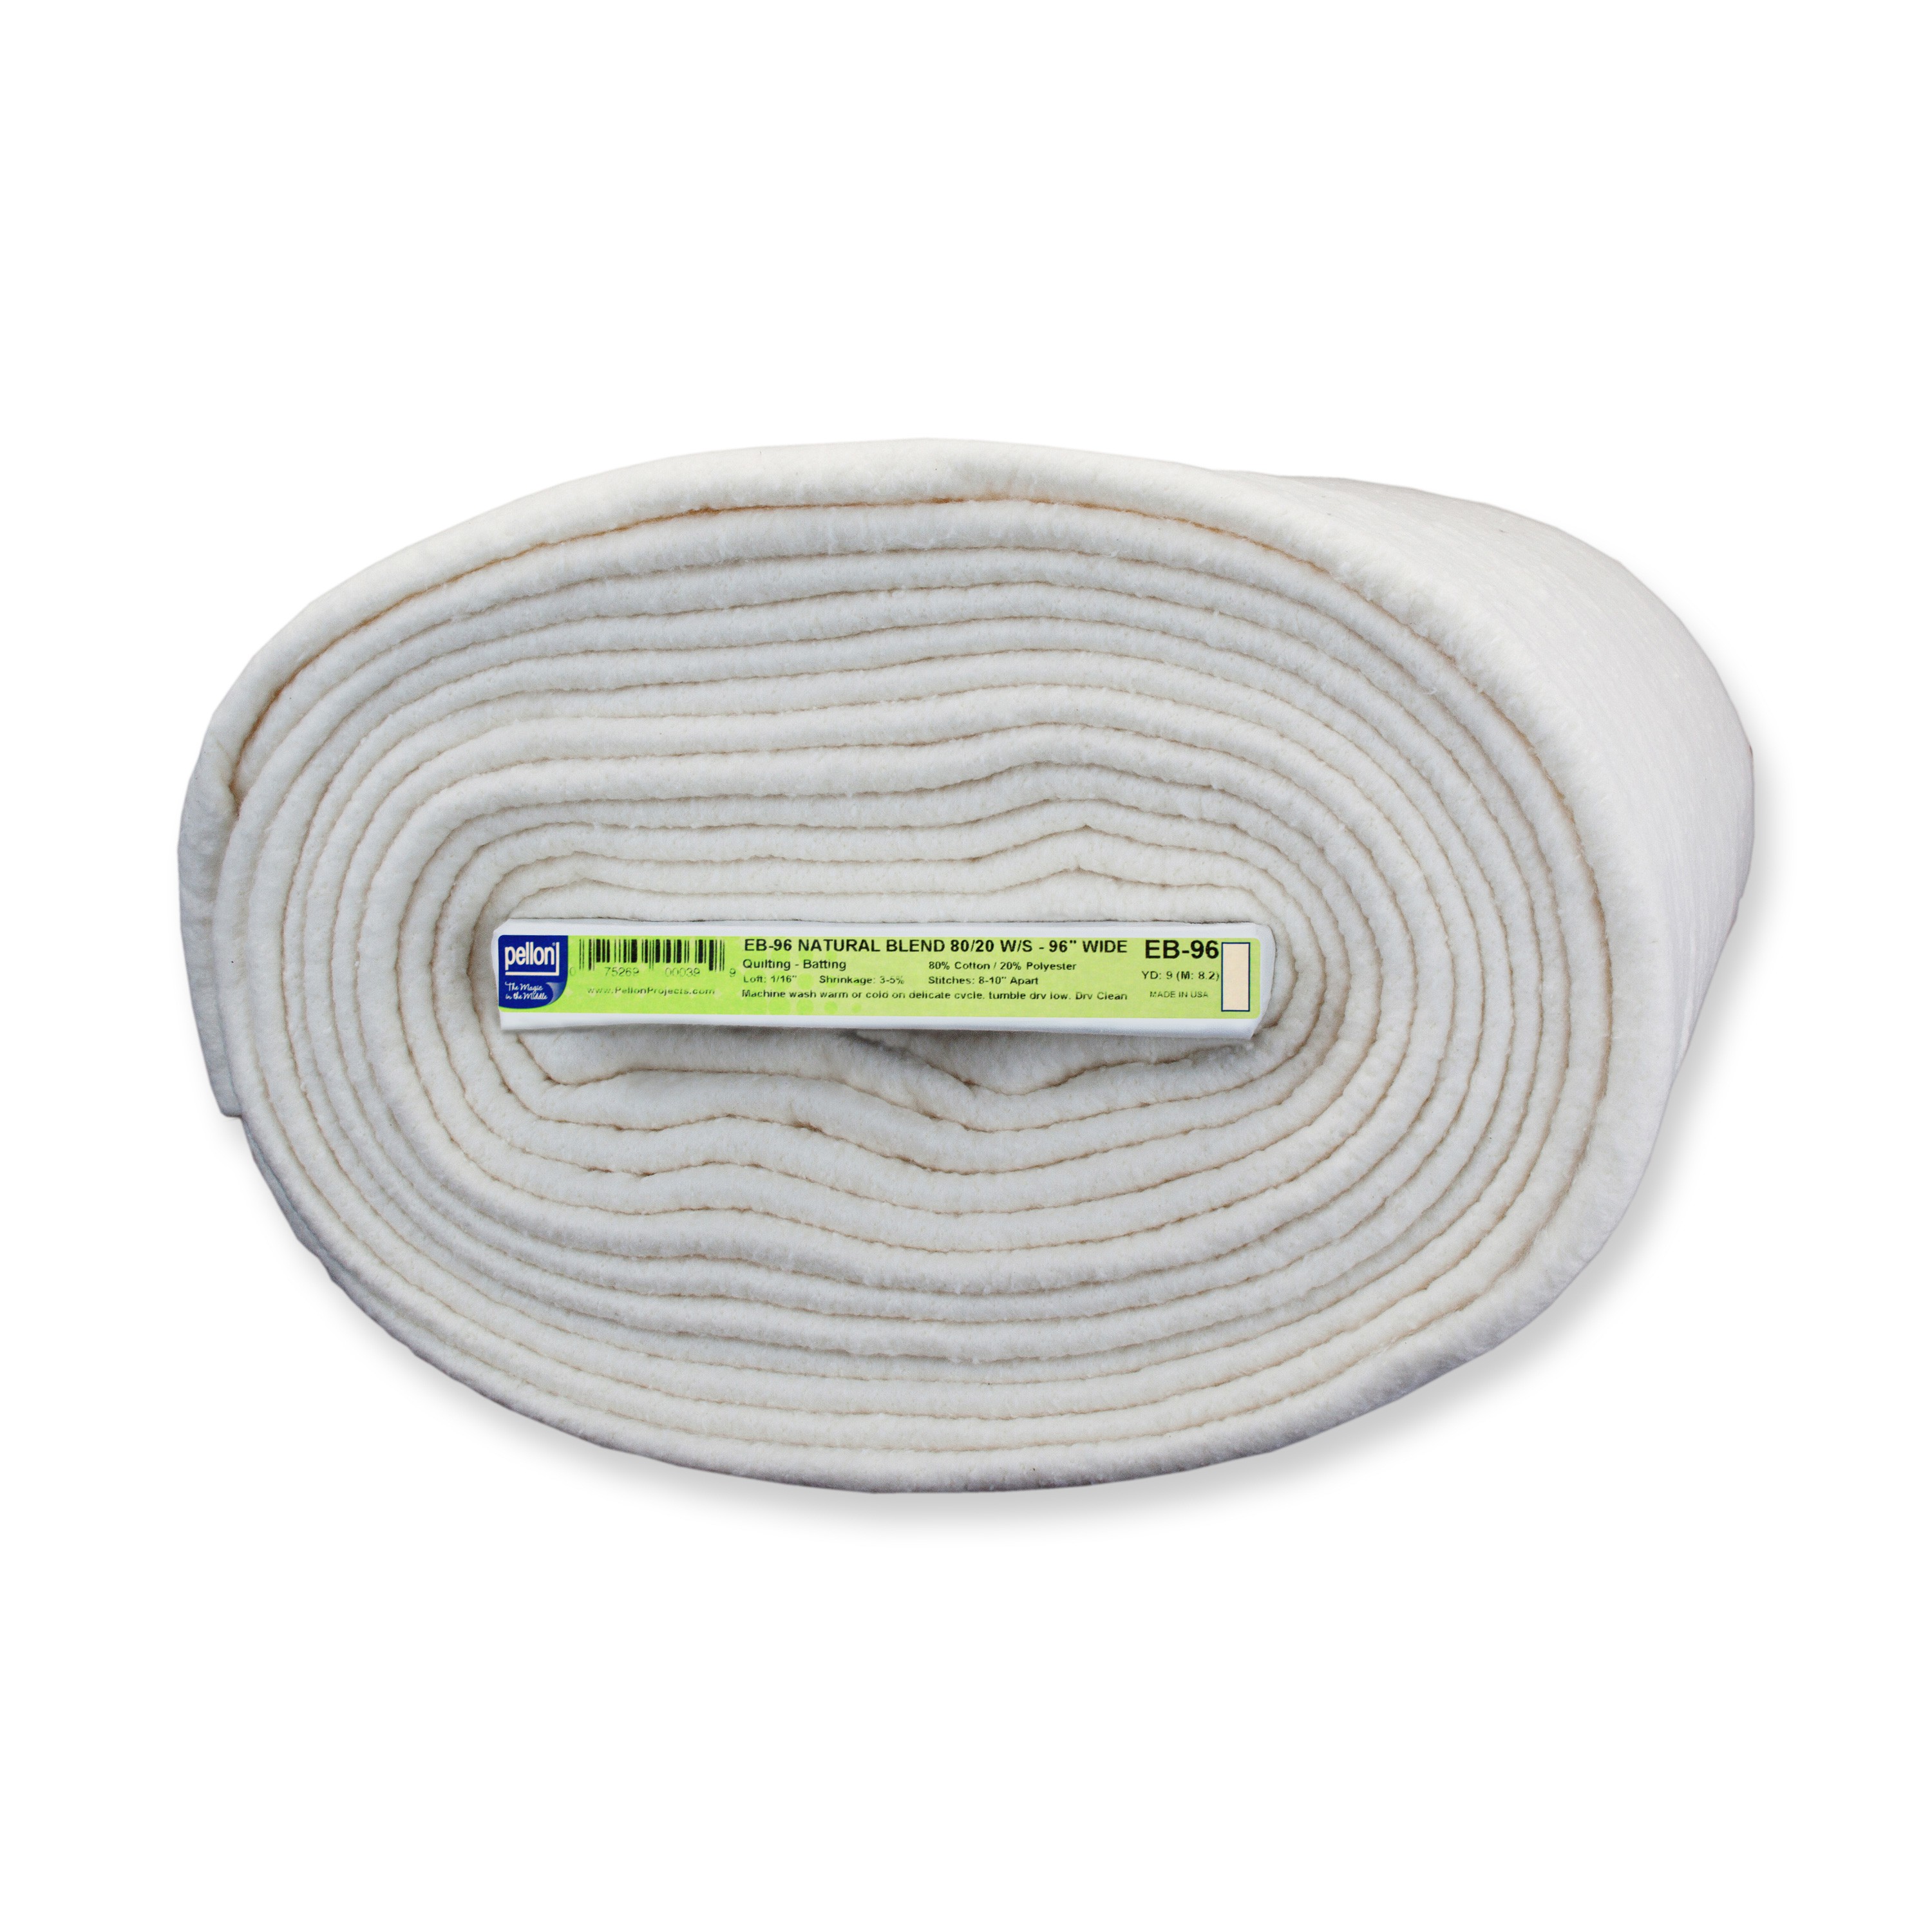 Pellon Natures Touch Wool Batting 96in - 075269003024